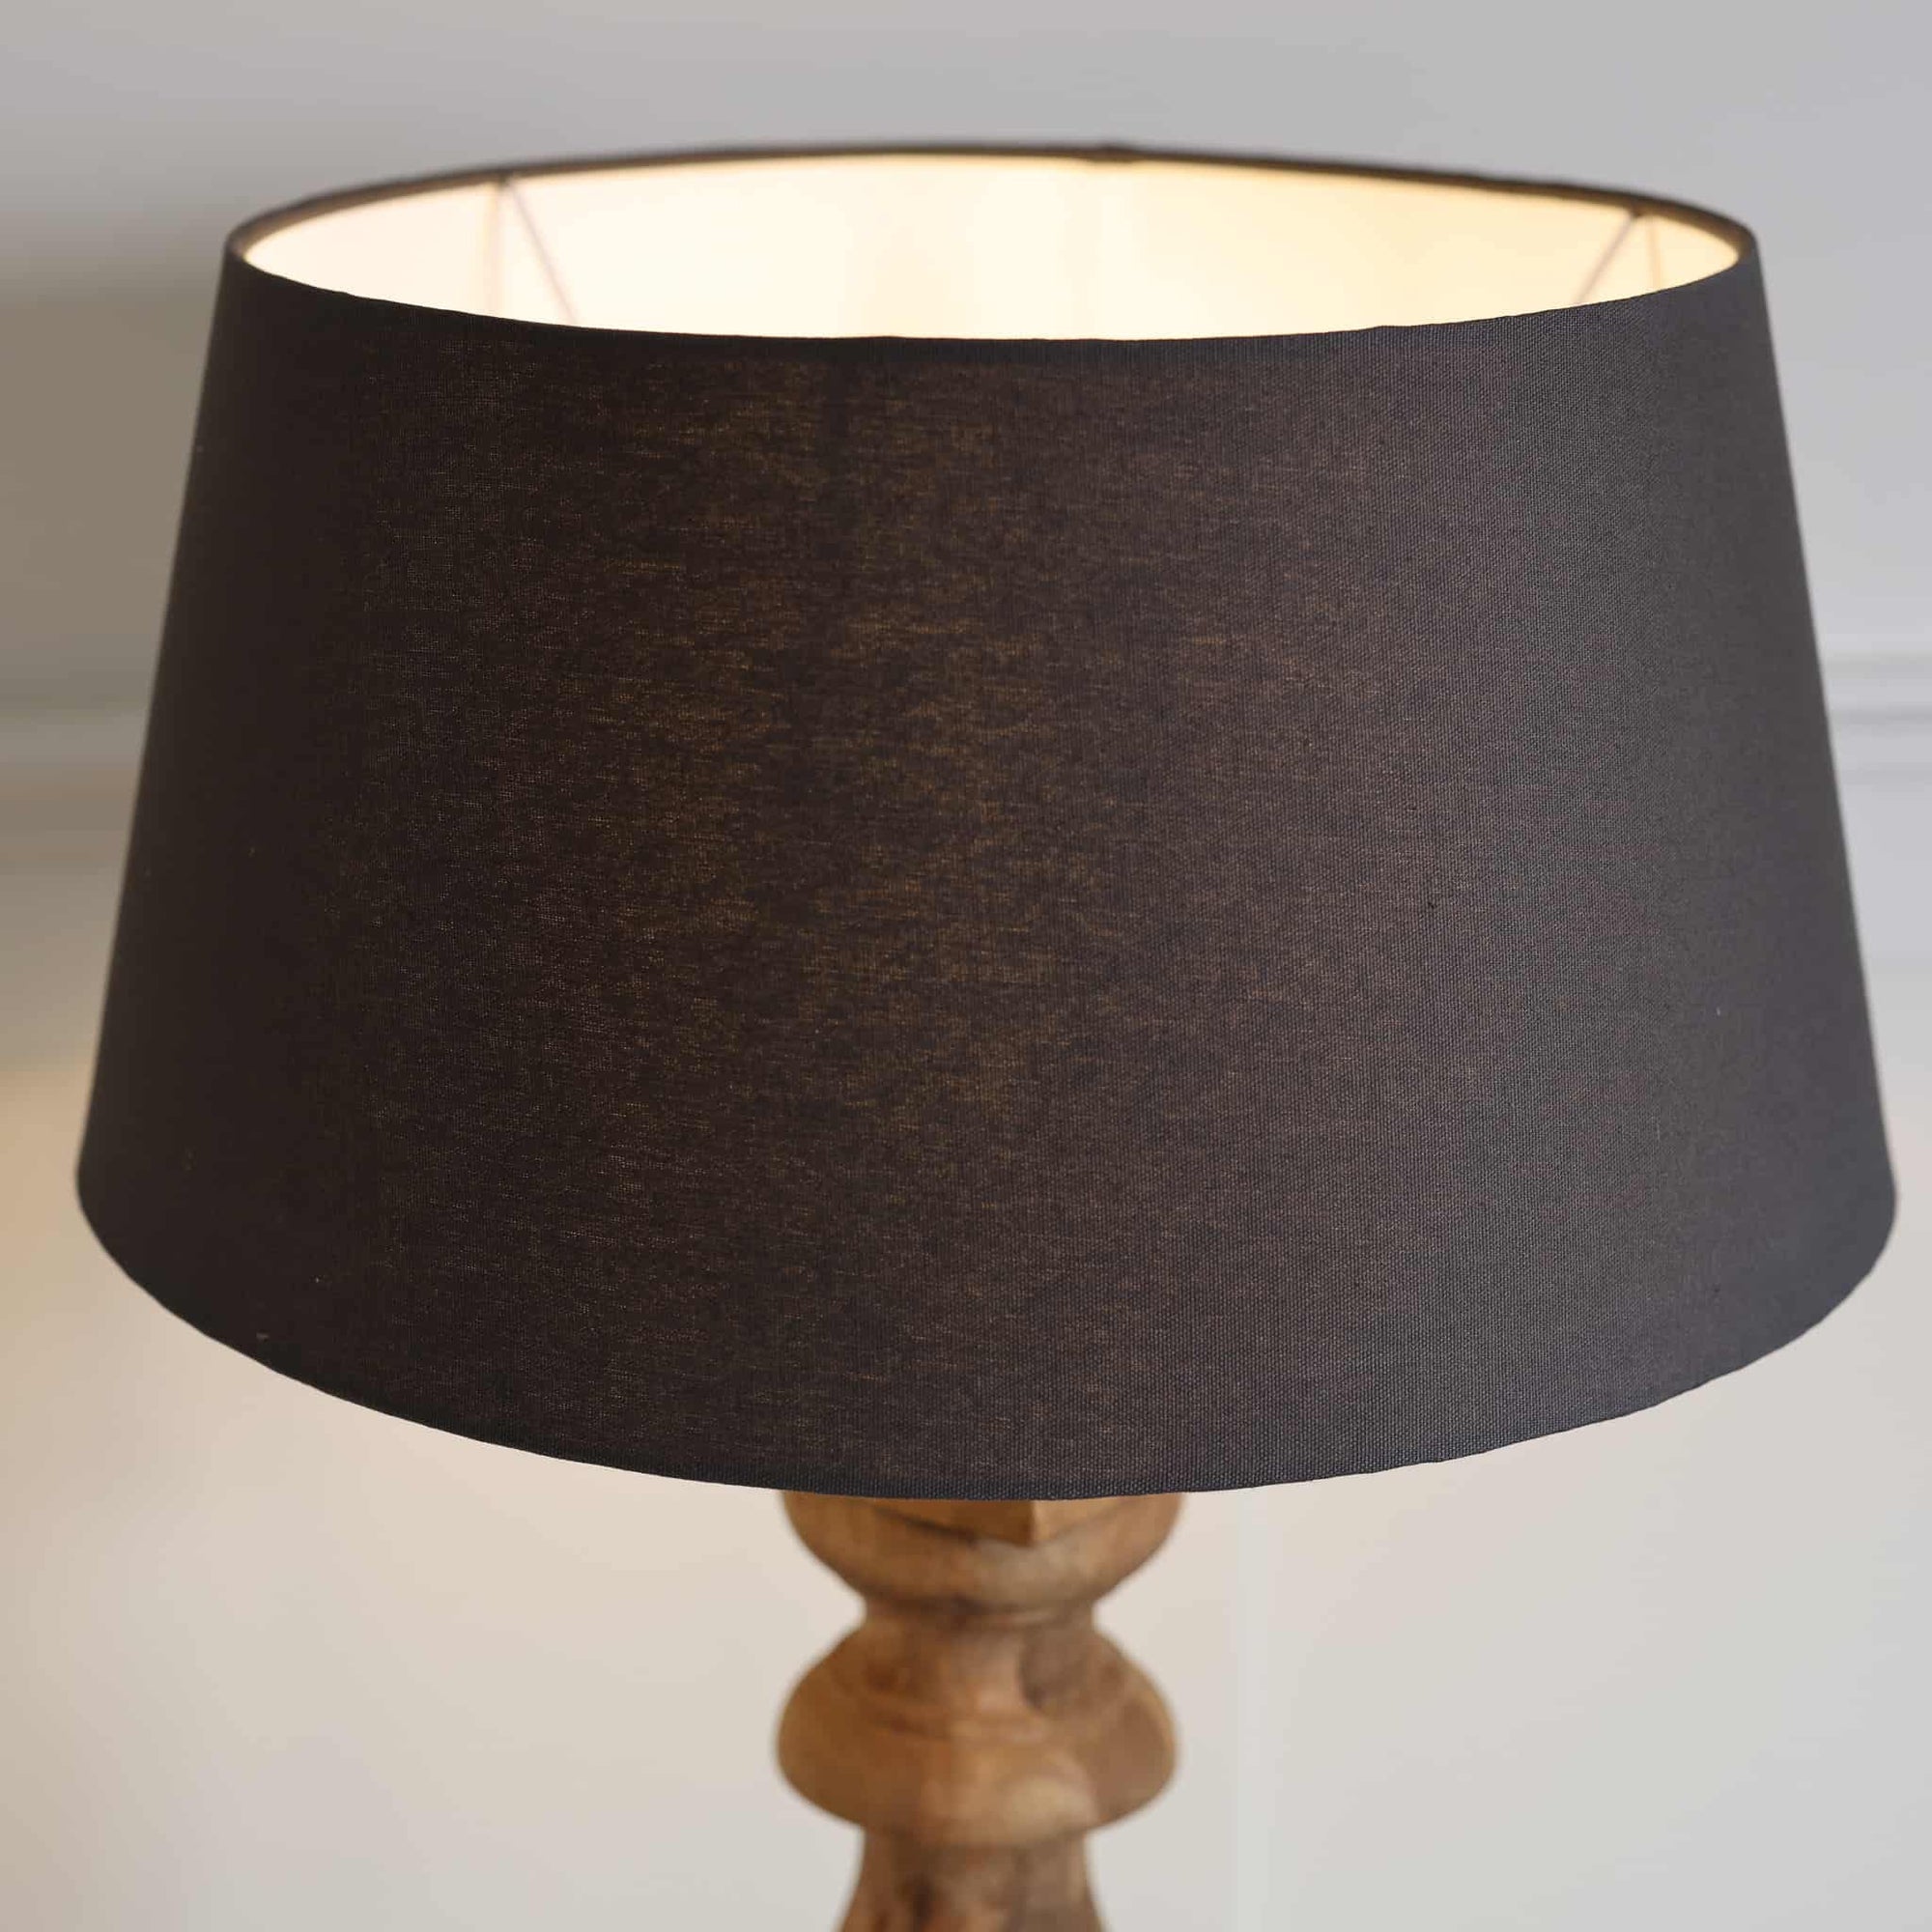 Black cotton lamp shade on wooden base, with lamp switched on.